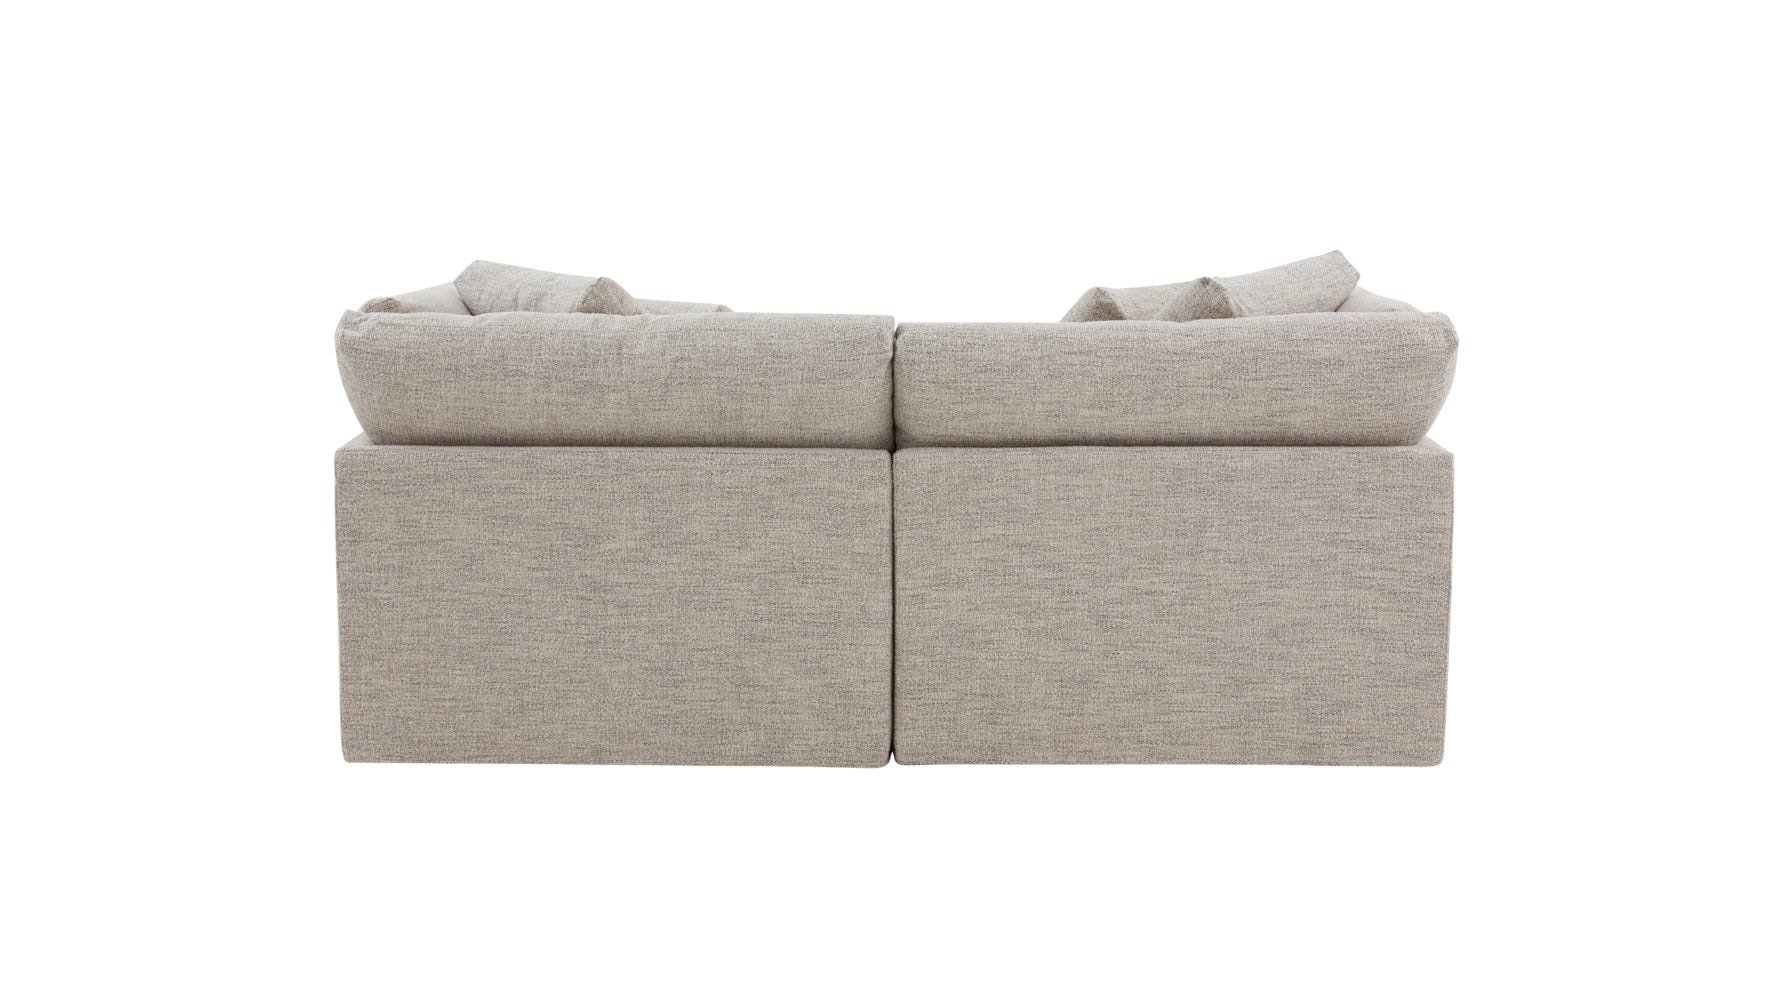 Get Together™ 3-Piece Modular Sectional, Large, Oatmeal - Image 7